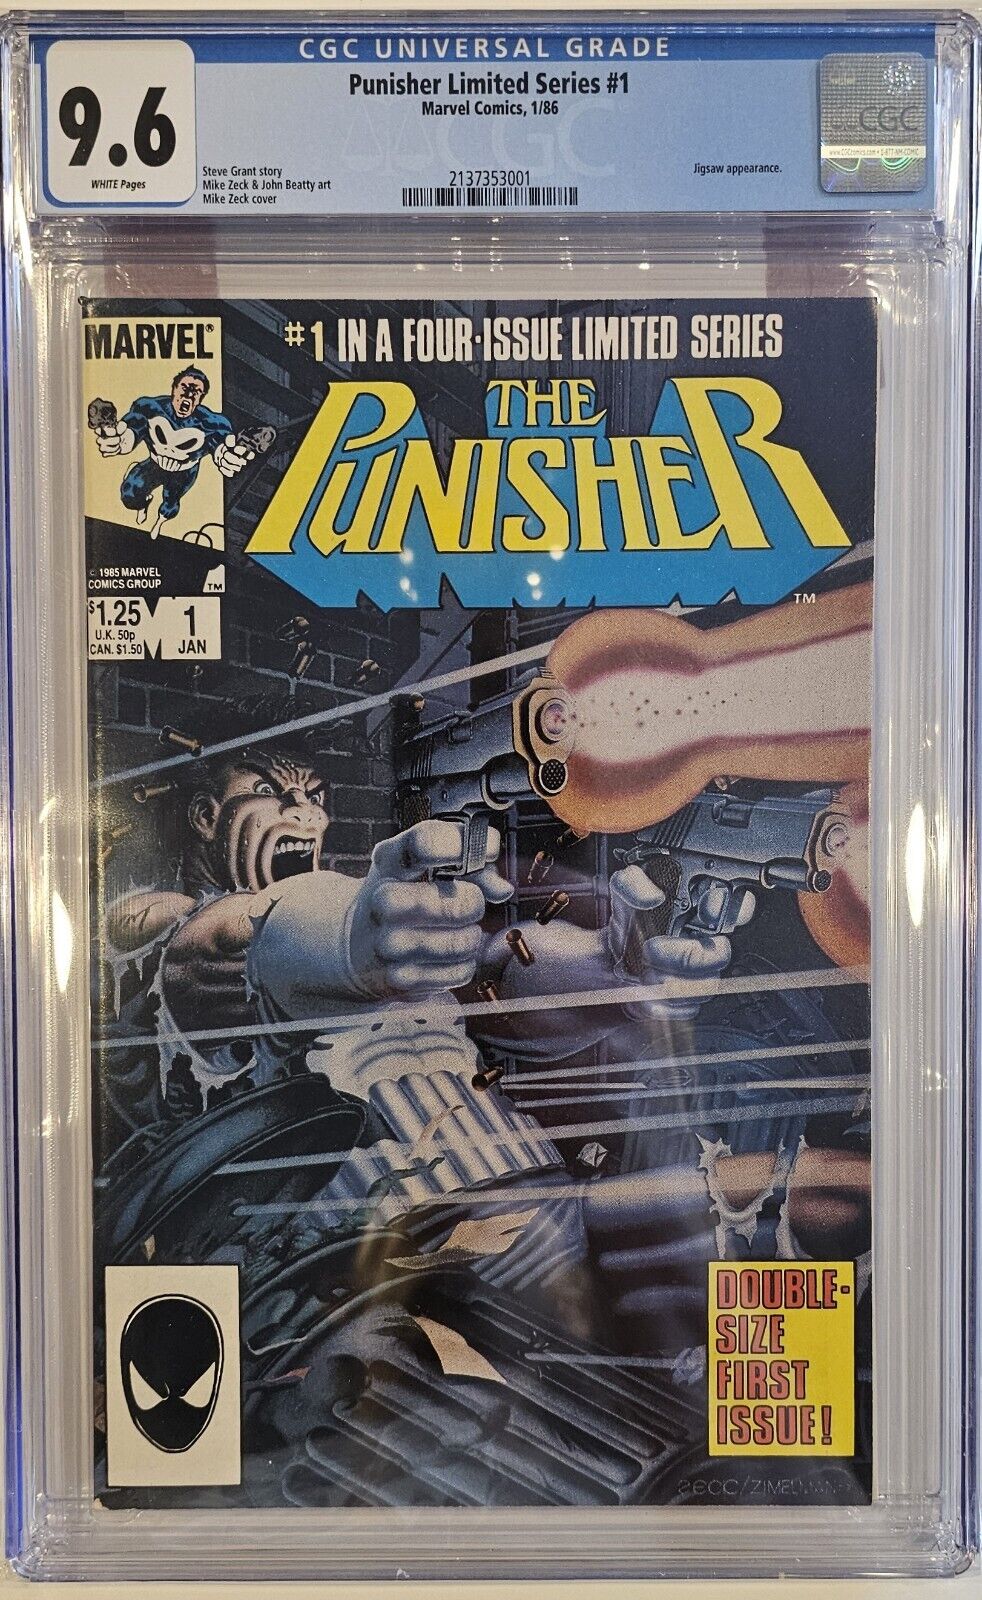 PUNISHER LIMITED SERIES #1 CGC 9.6 WHITE PAGES // MARVEL COMICS 1986